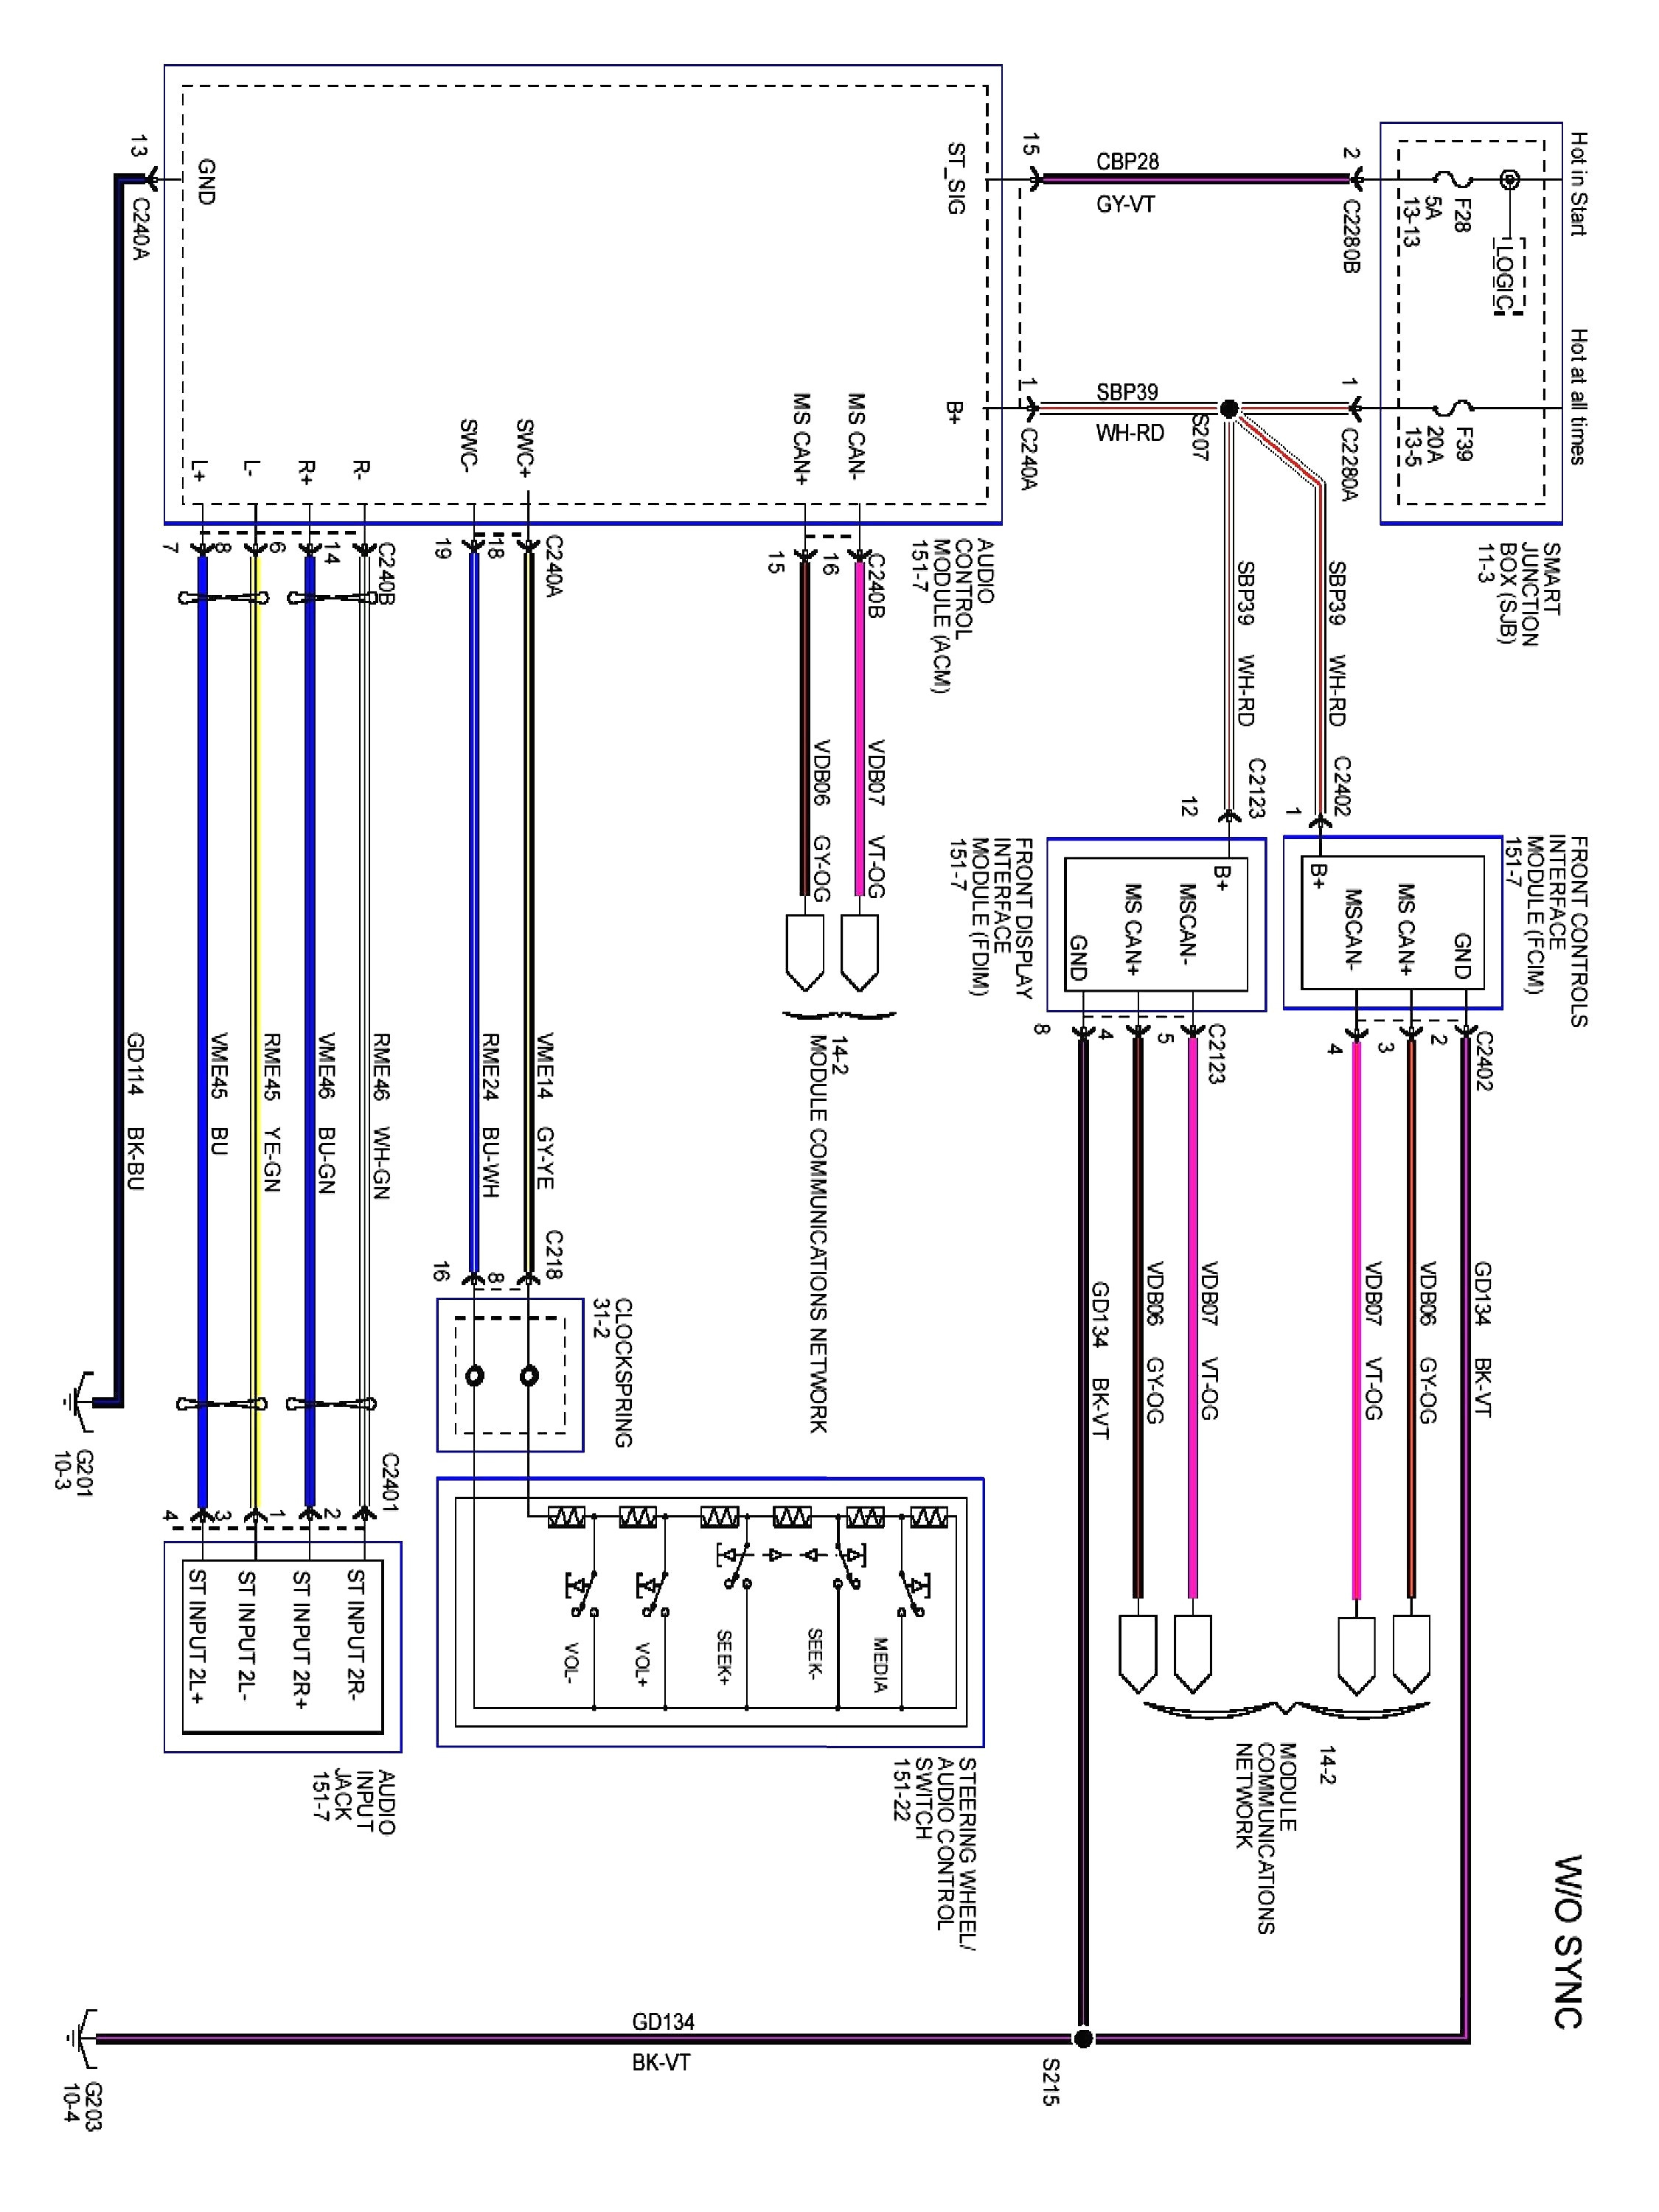 rd350lc wiring diagram inspirational wiring a ac thermostat diagram new wiring diagram ac valid hvac